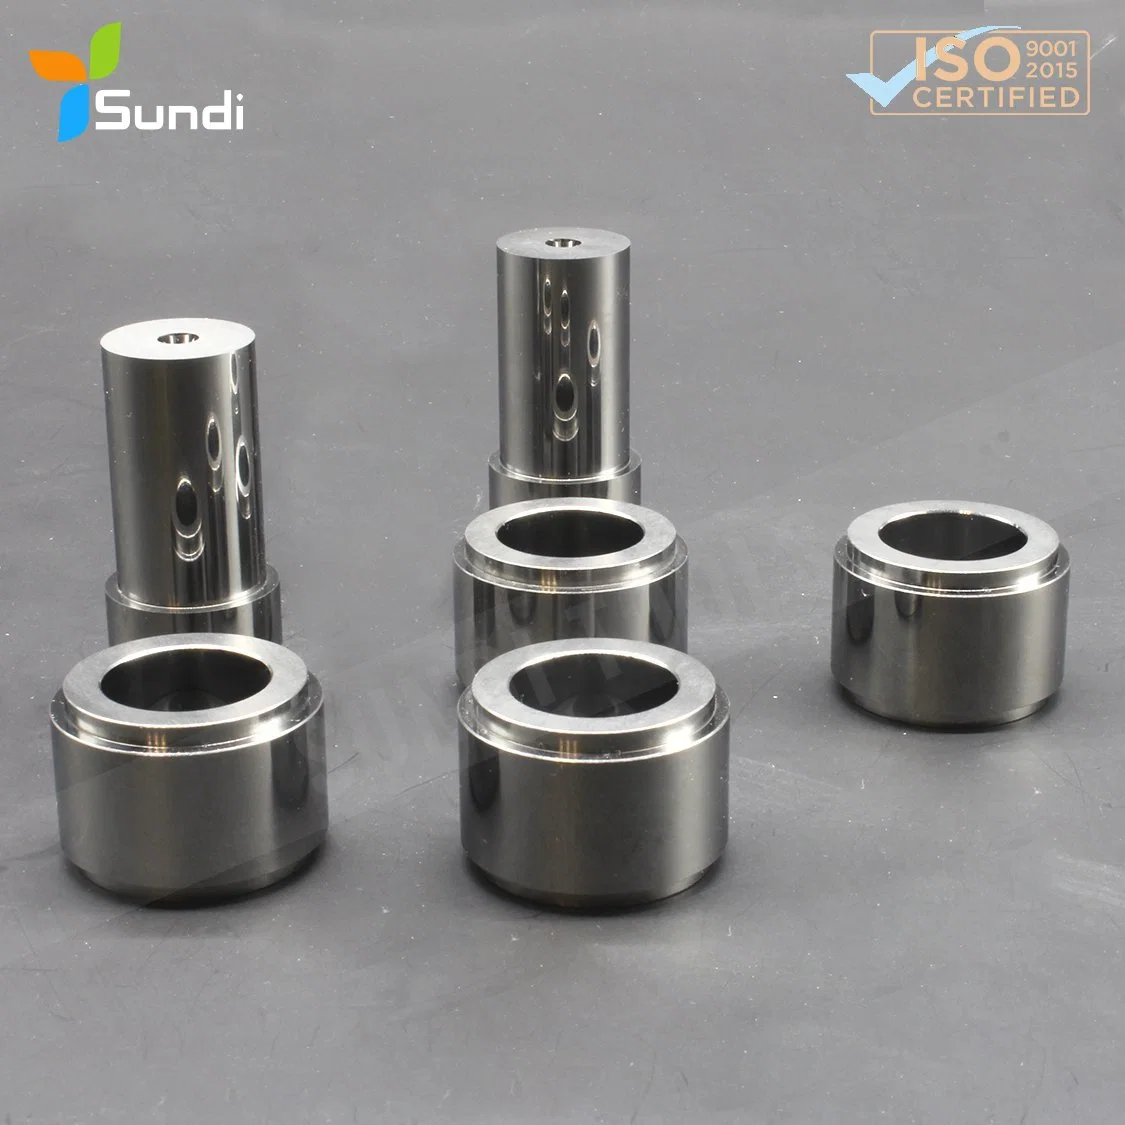 OEM Mirror Polished Dlc Mold Components Fabricate Tungsten Carbide Cemented Forming Metal Stamping Tools Punches and Dies